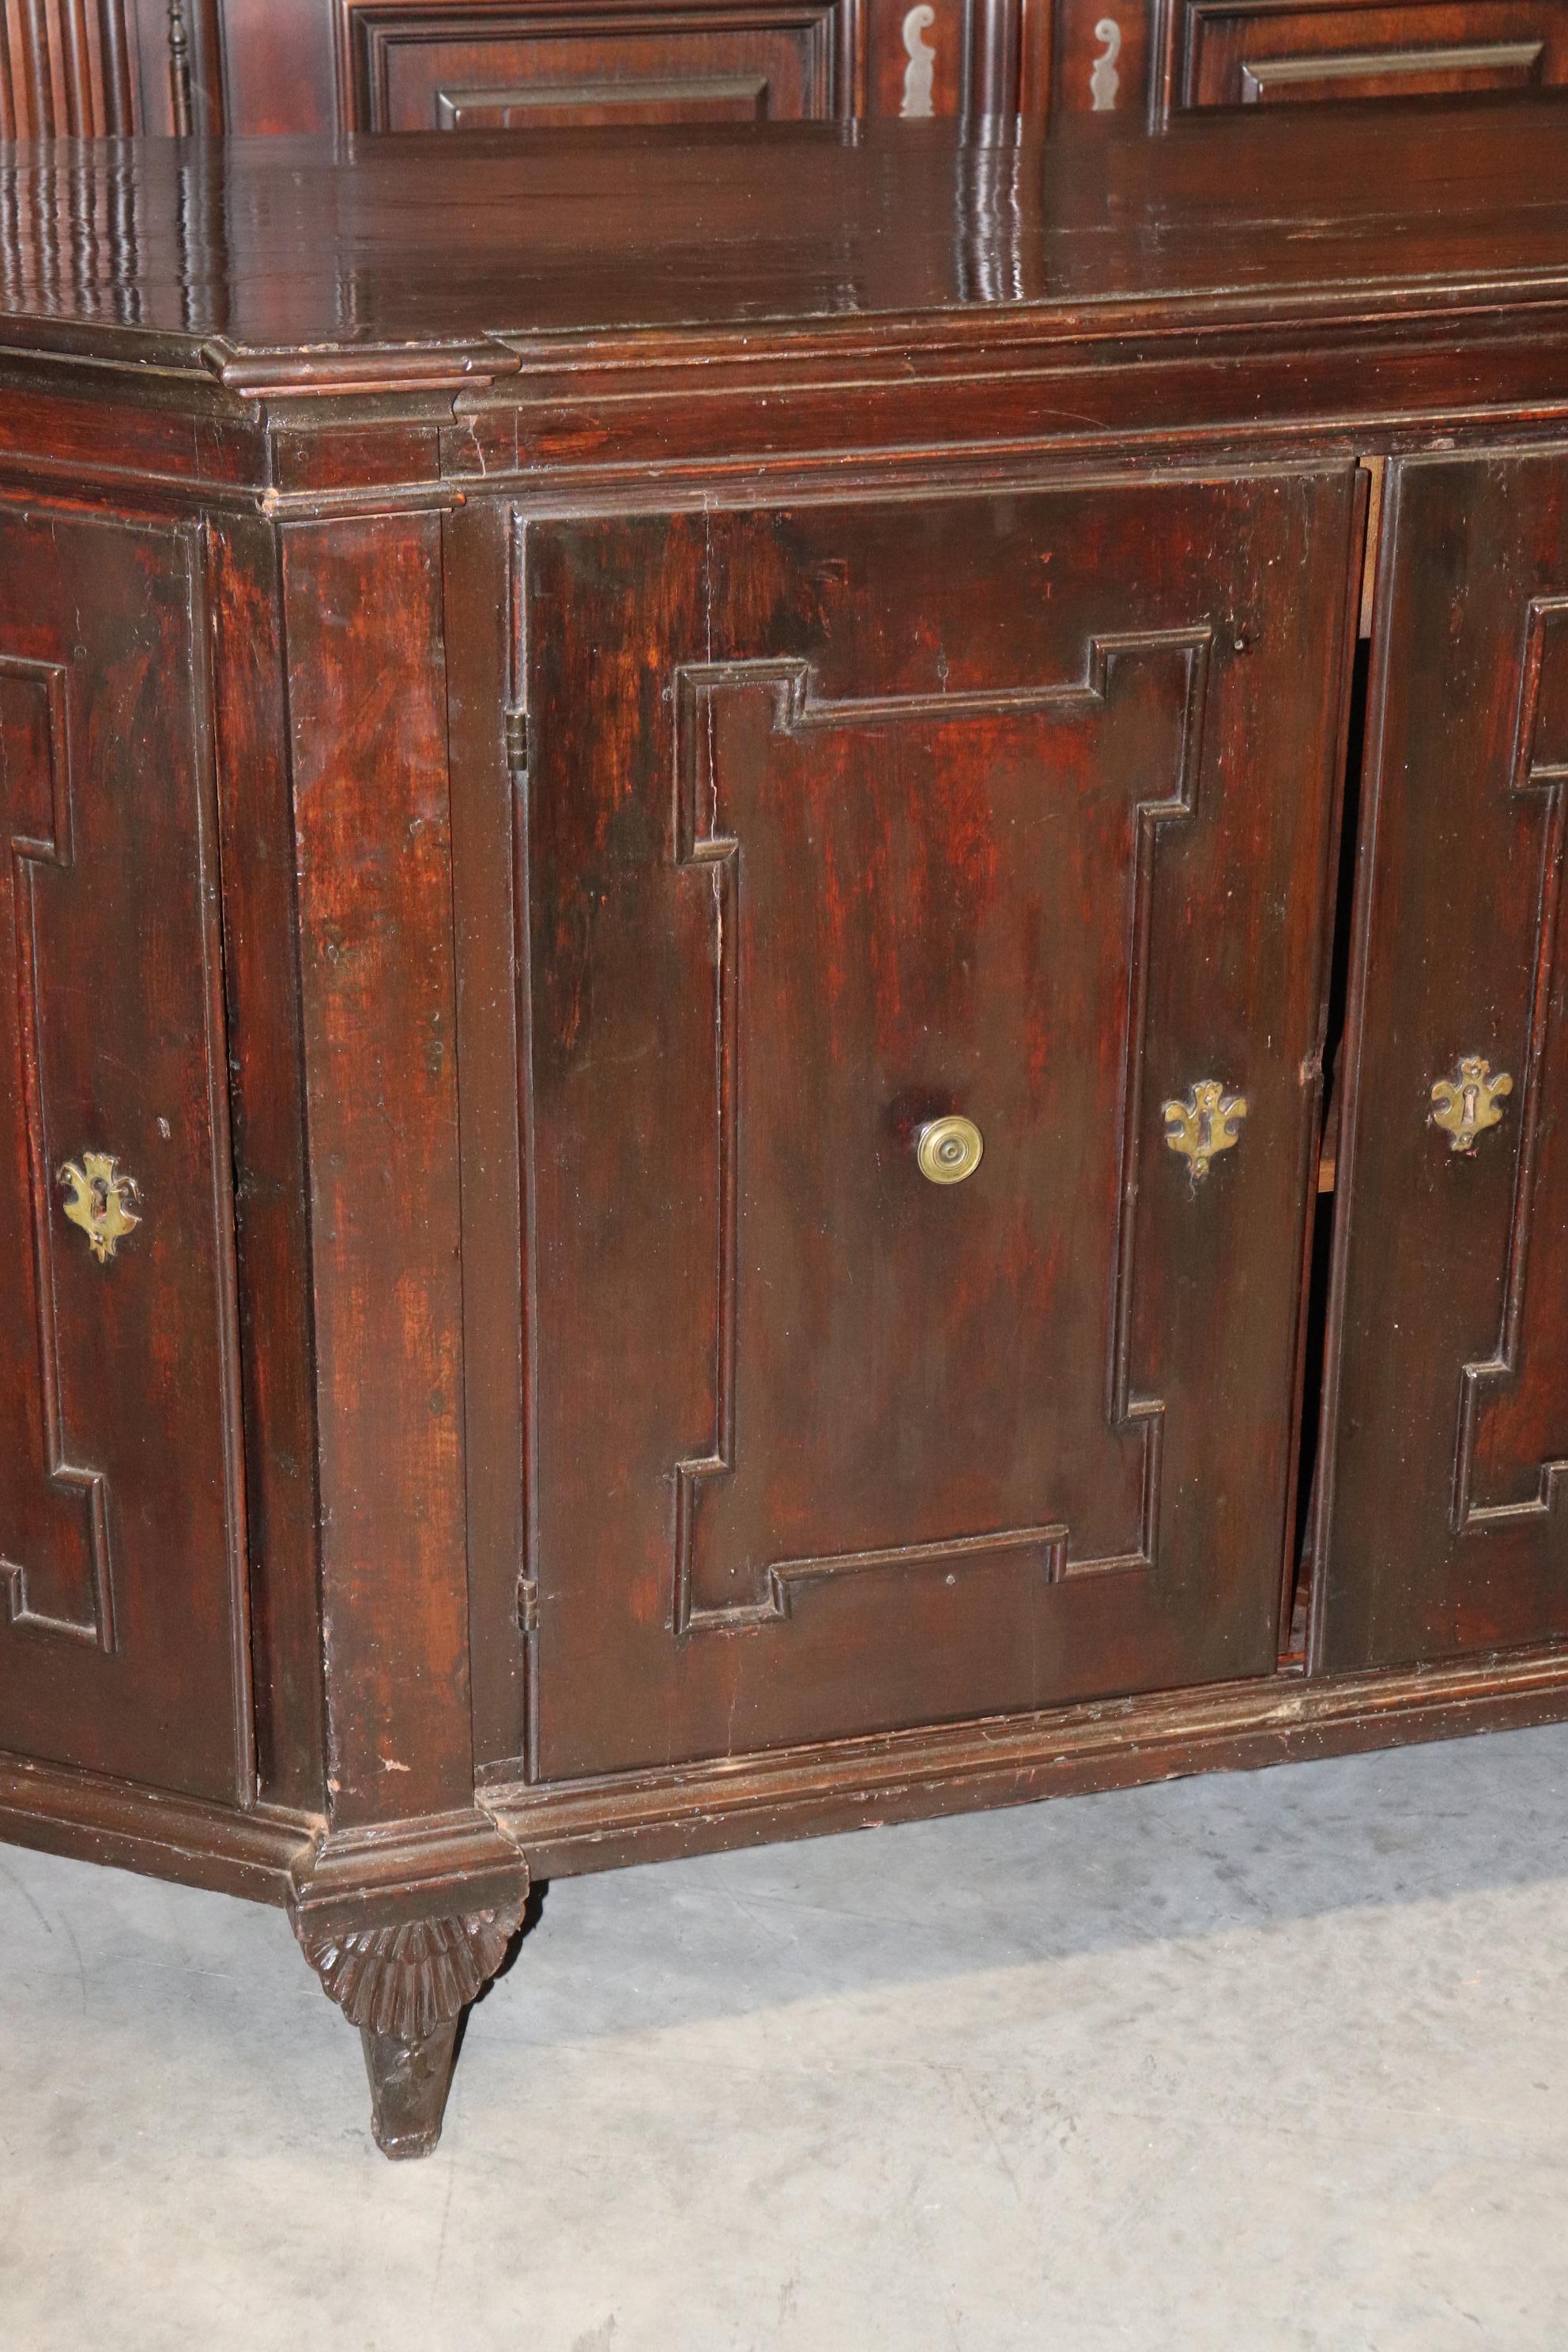 Late 18th Century Rare Period French 1790s era Directoire Mahogany Sideboard Buffet For Sale